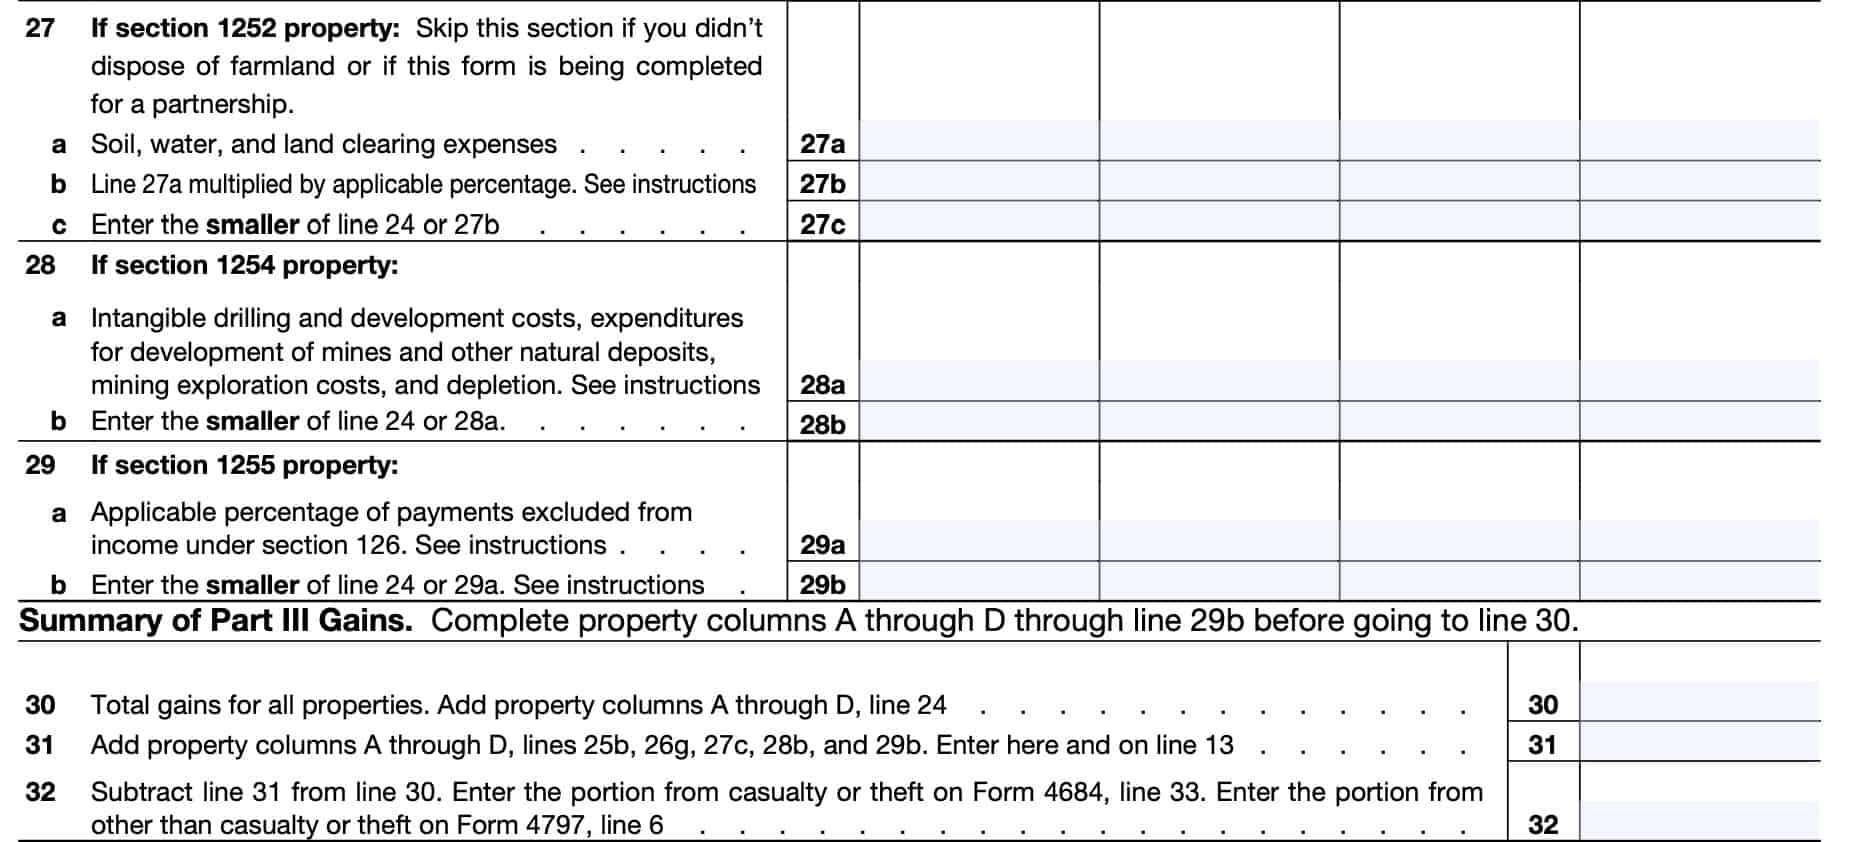 irs form 4797 part iii: gain from disposition of Section 1252, 1254, and 1255 property